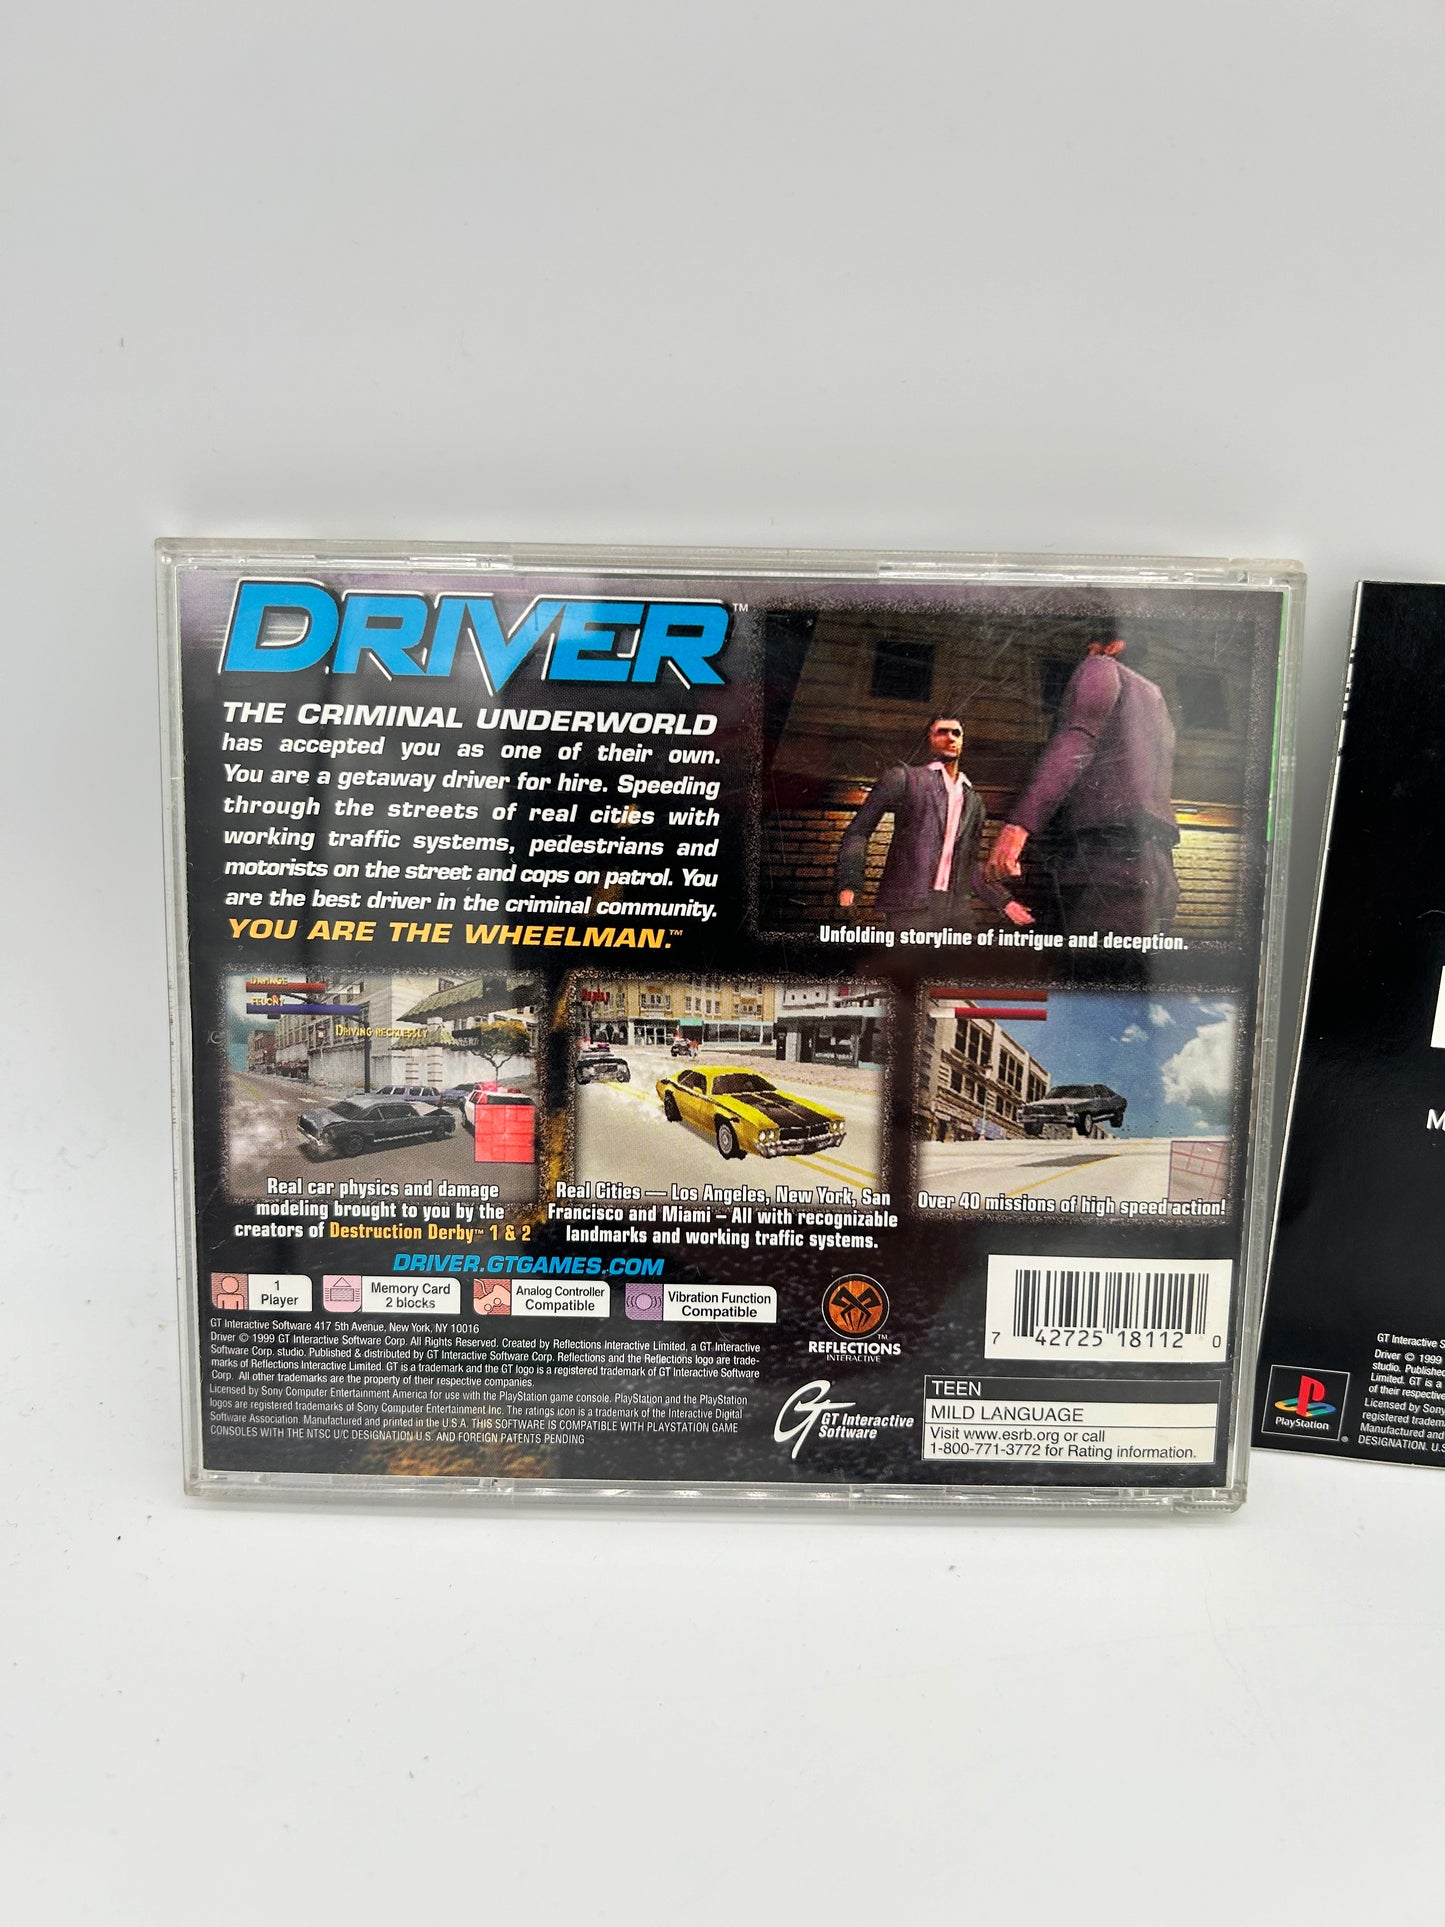 SONY PLAYSTATiON [PS1] | DRIVER YOU ARE THE WHEELMAN | GREATEST HiTS